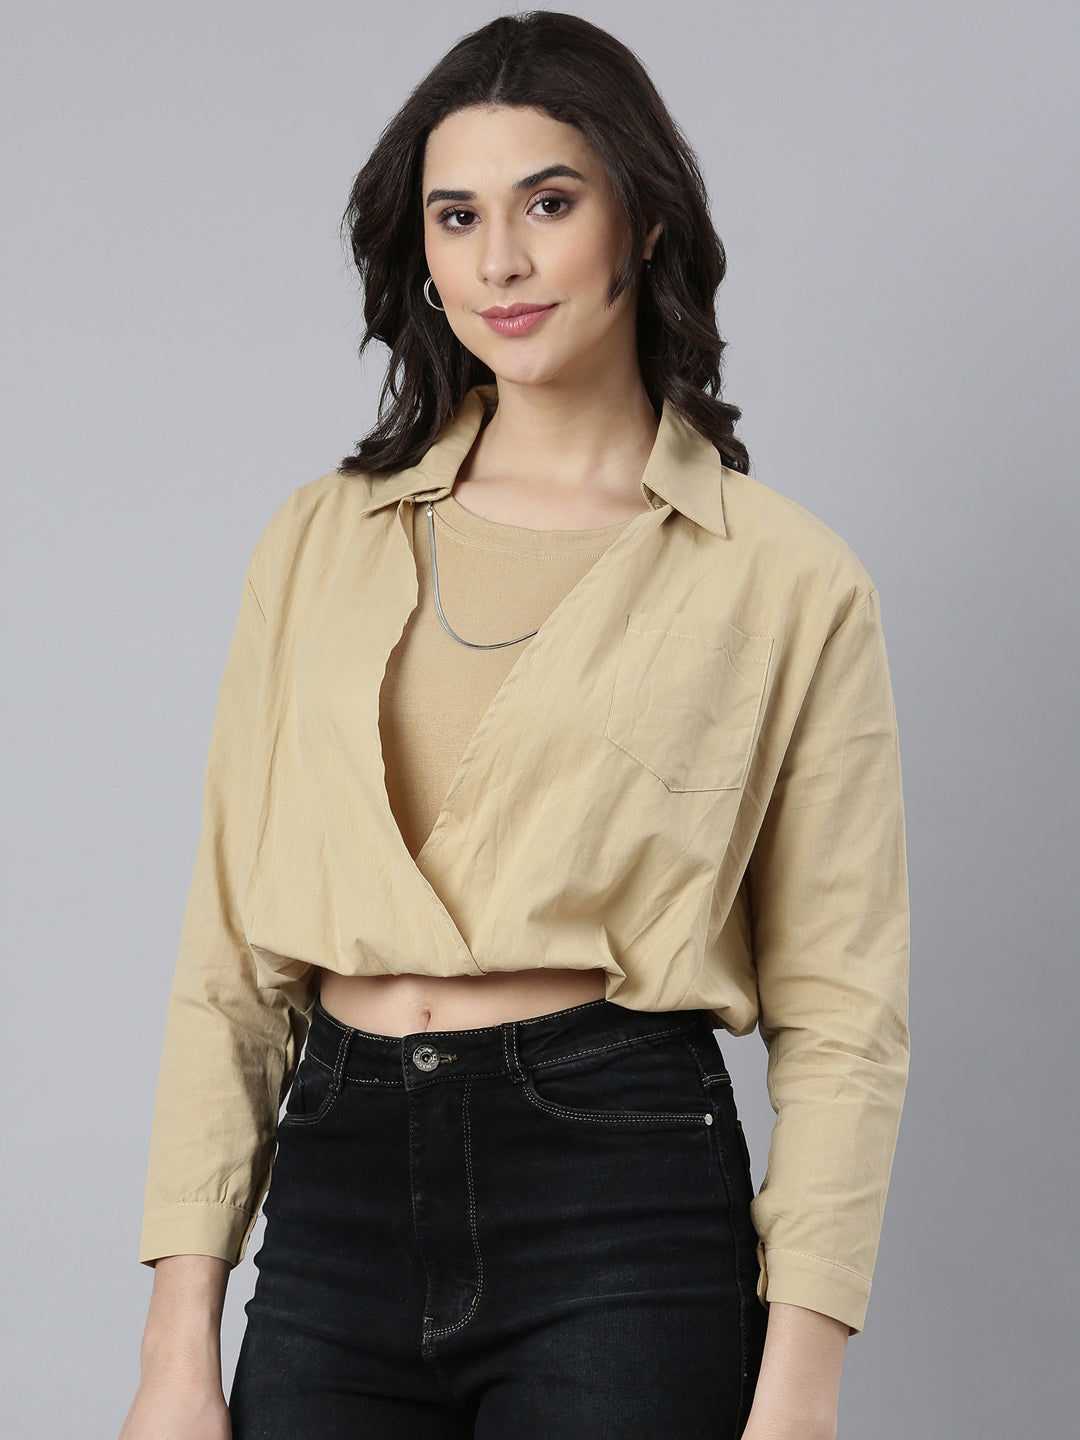 Women Solid Khaki Shirt Style Top Comes with Attached Inner Top and Neck Chain